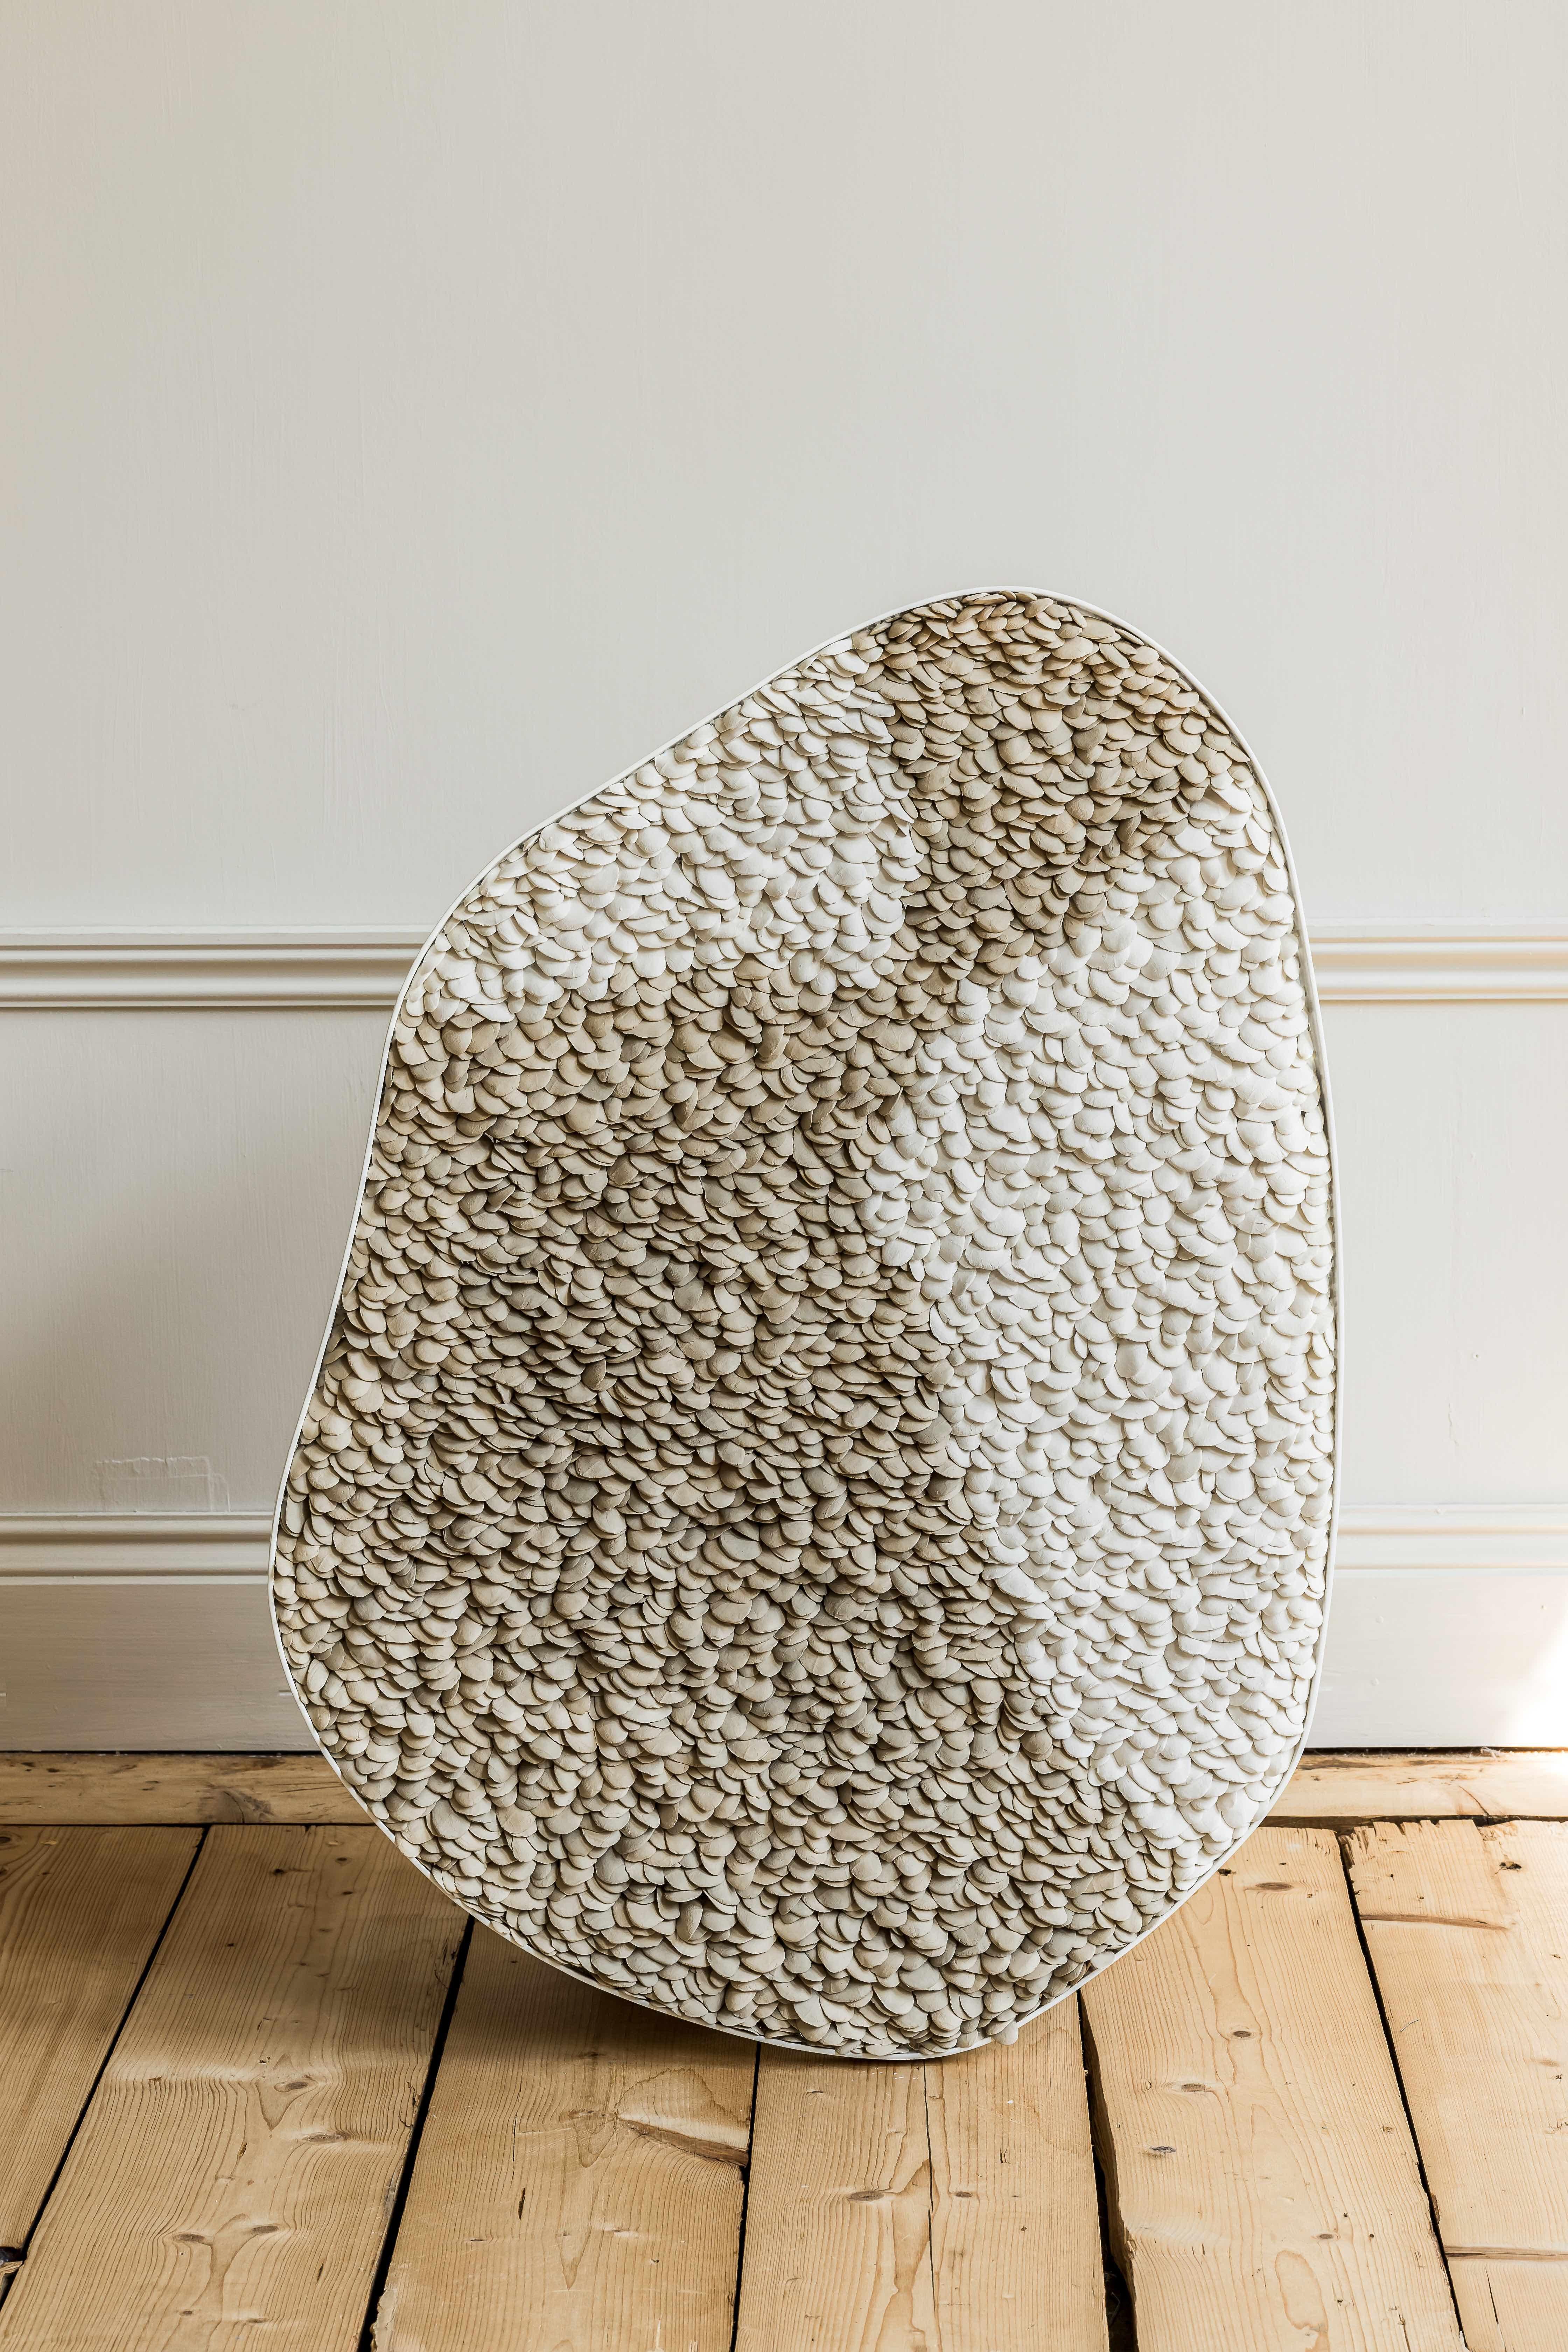 Eatnu rug by Hanna Heino
Dimensions: D 4 x W 59 x H 82 cm
Materials: Handbuilt, Clay, Porcelain, Aluminum.


Hanna Heino is a contemporary clay artist from Finland known for her delicate form language that honours the beauty and subtle nuances